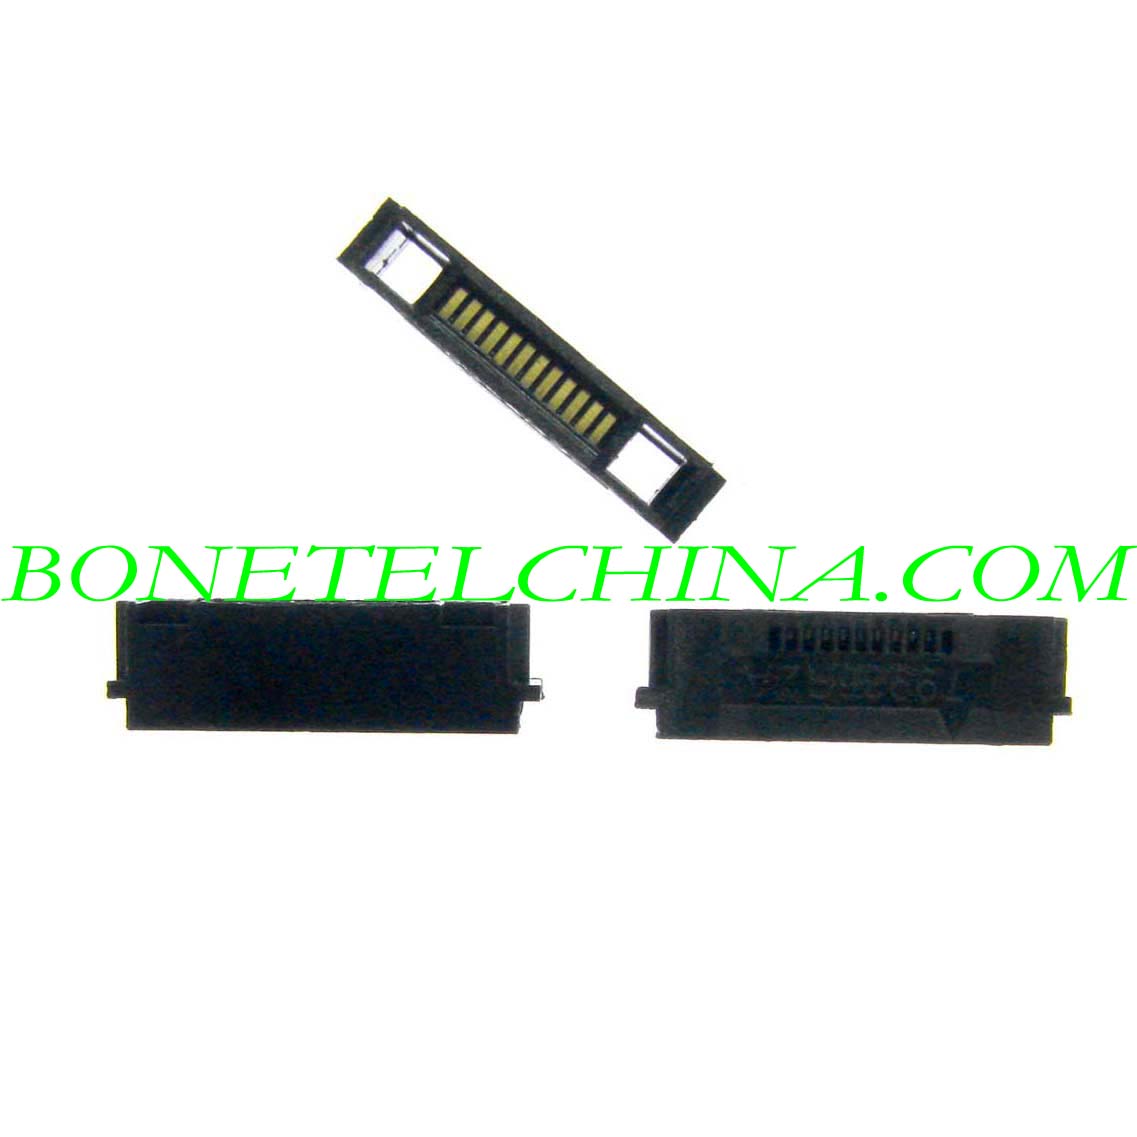 Charger connector for Sony Ericsson K310